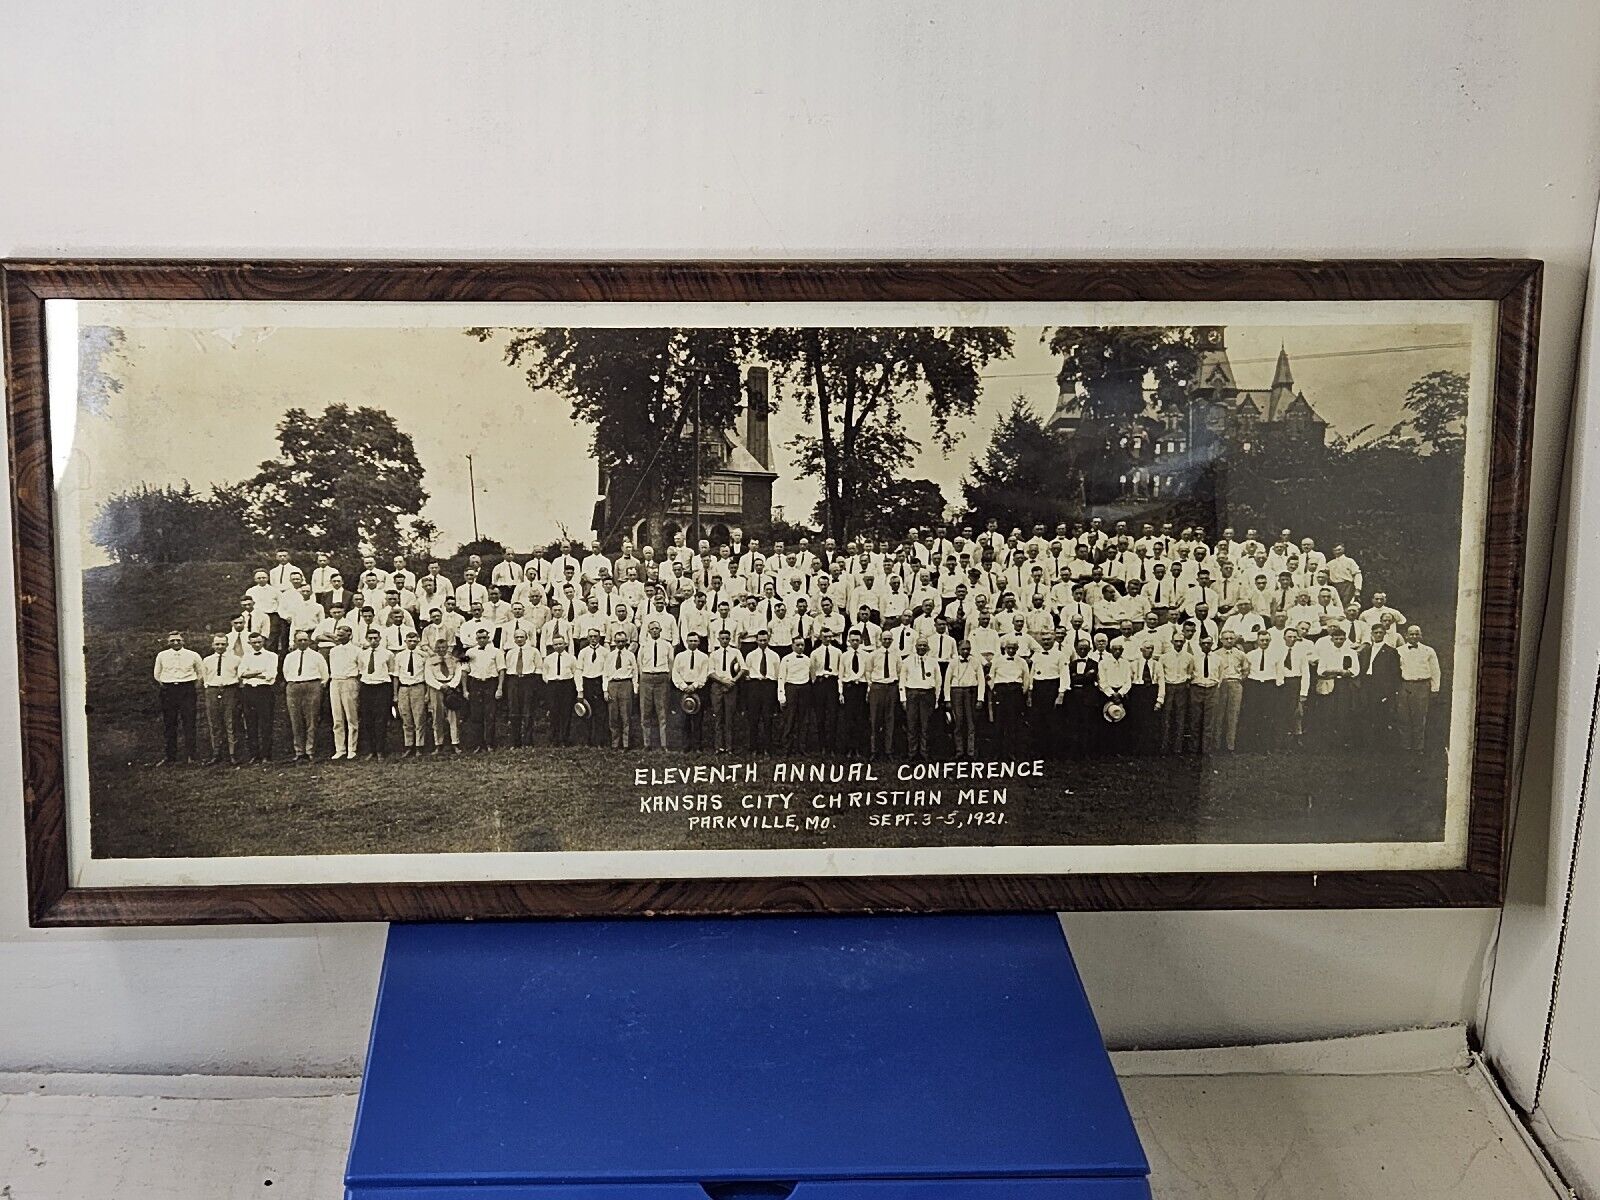 11th annual conference of Christian men 1921 Group Photo Parkville Mo antique 